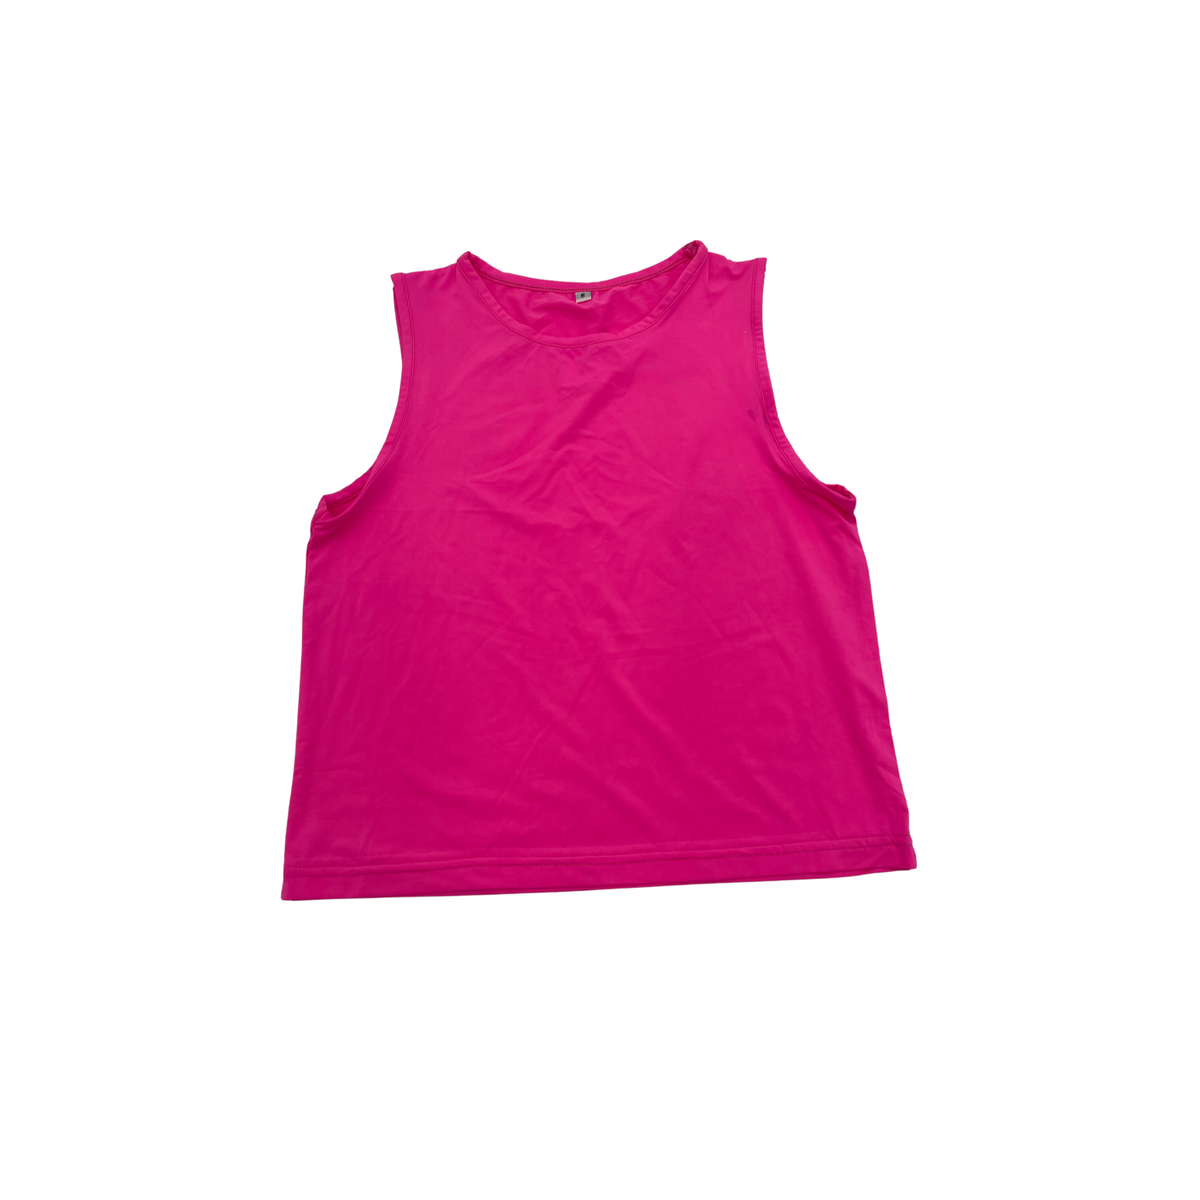 Hot Pink Athletic Tank Top